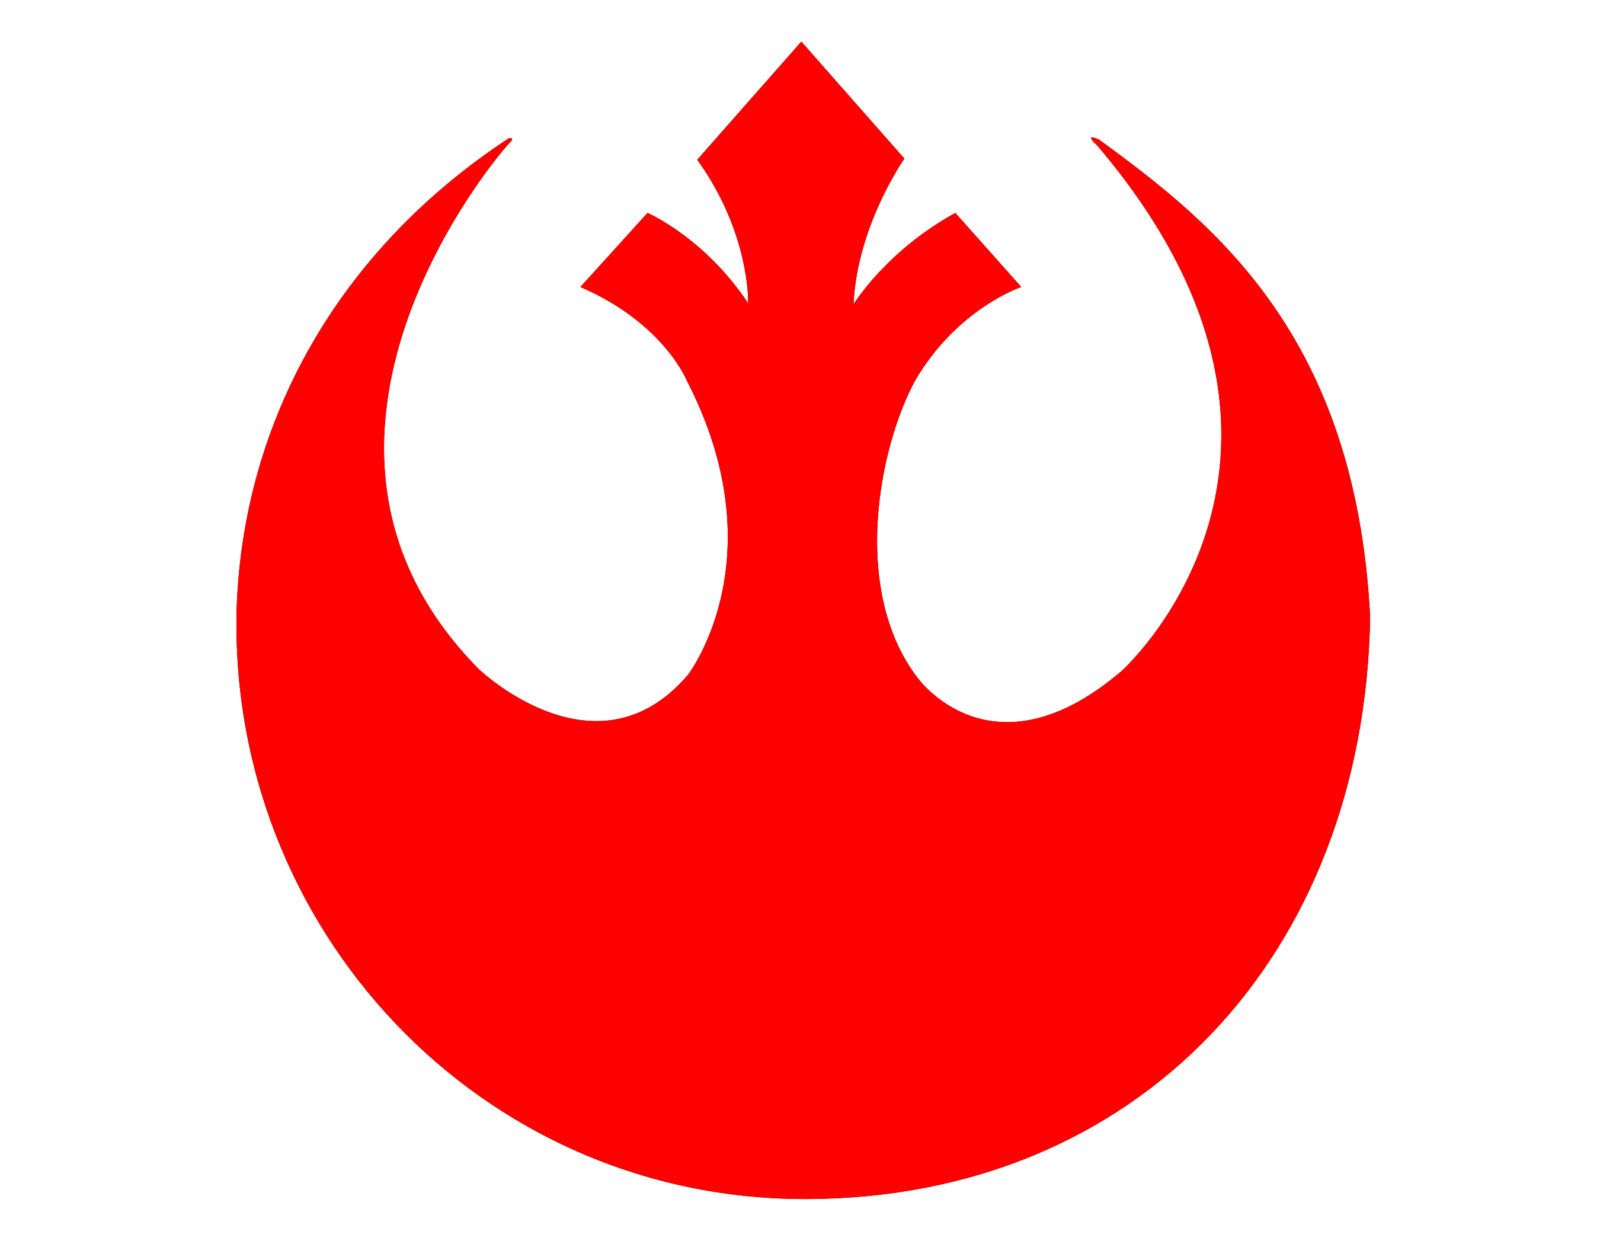 What is the symbol of the first order?